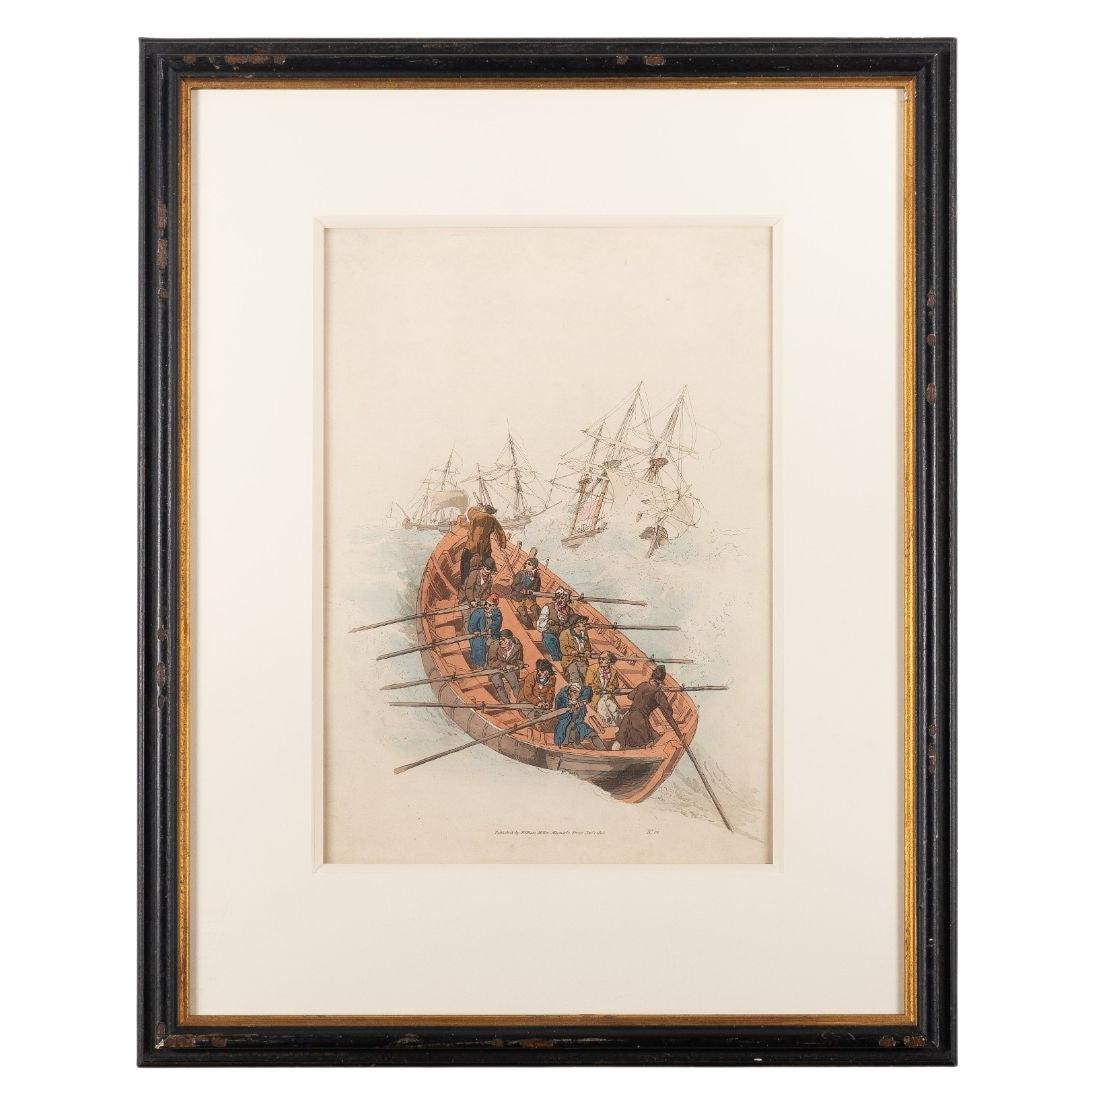 Hand Colored Engraving on Paper of Sailors in a Long Boat by William Miller For Sale